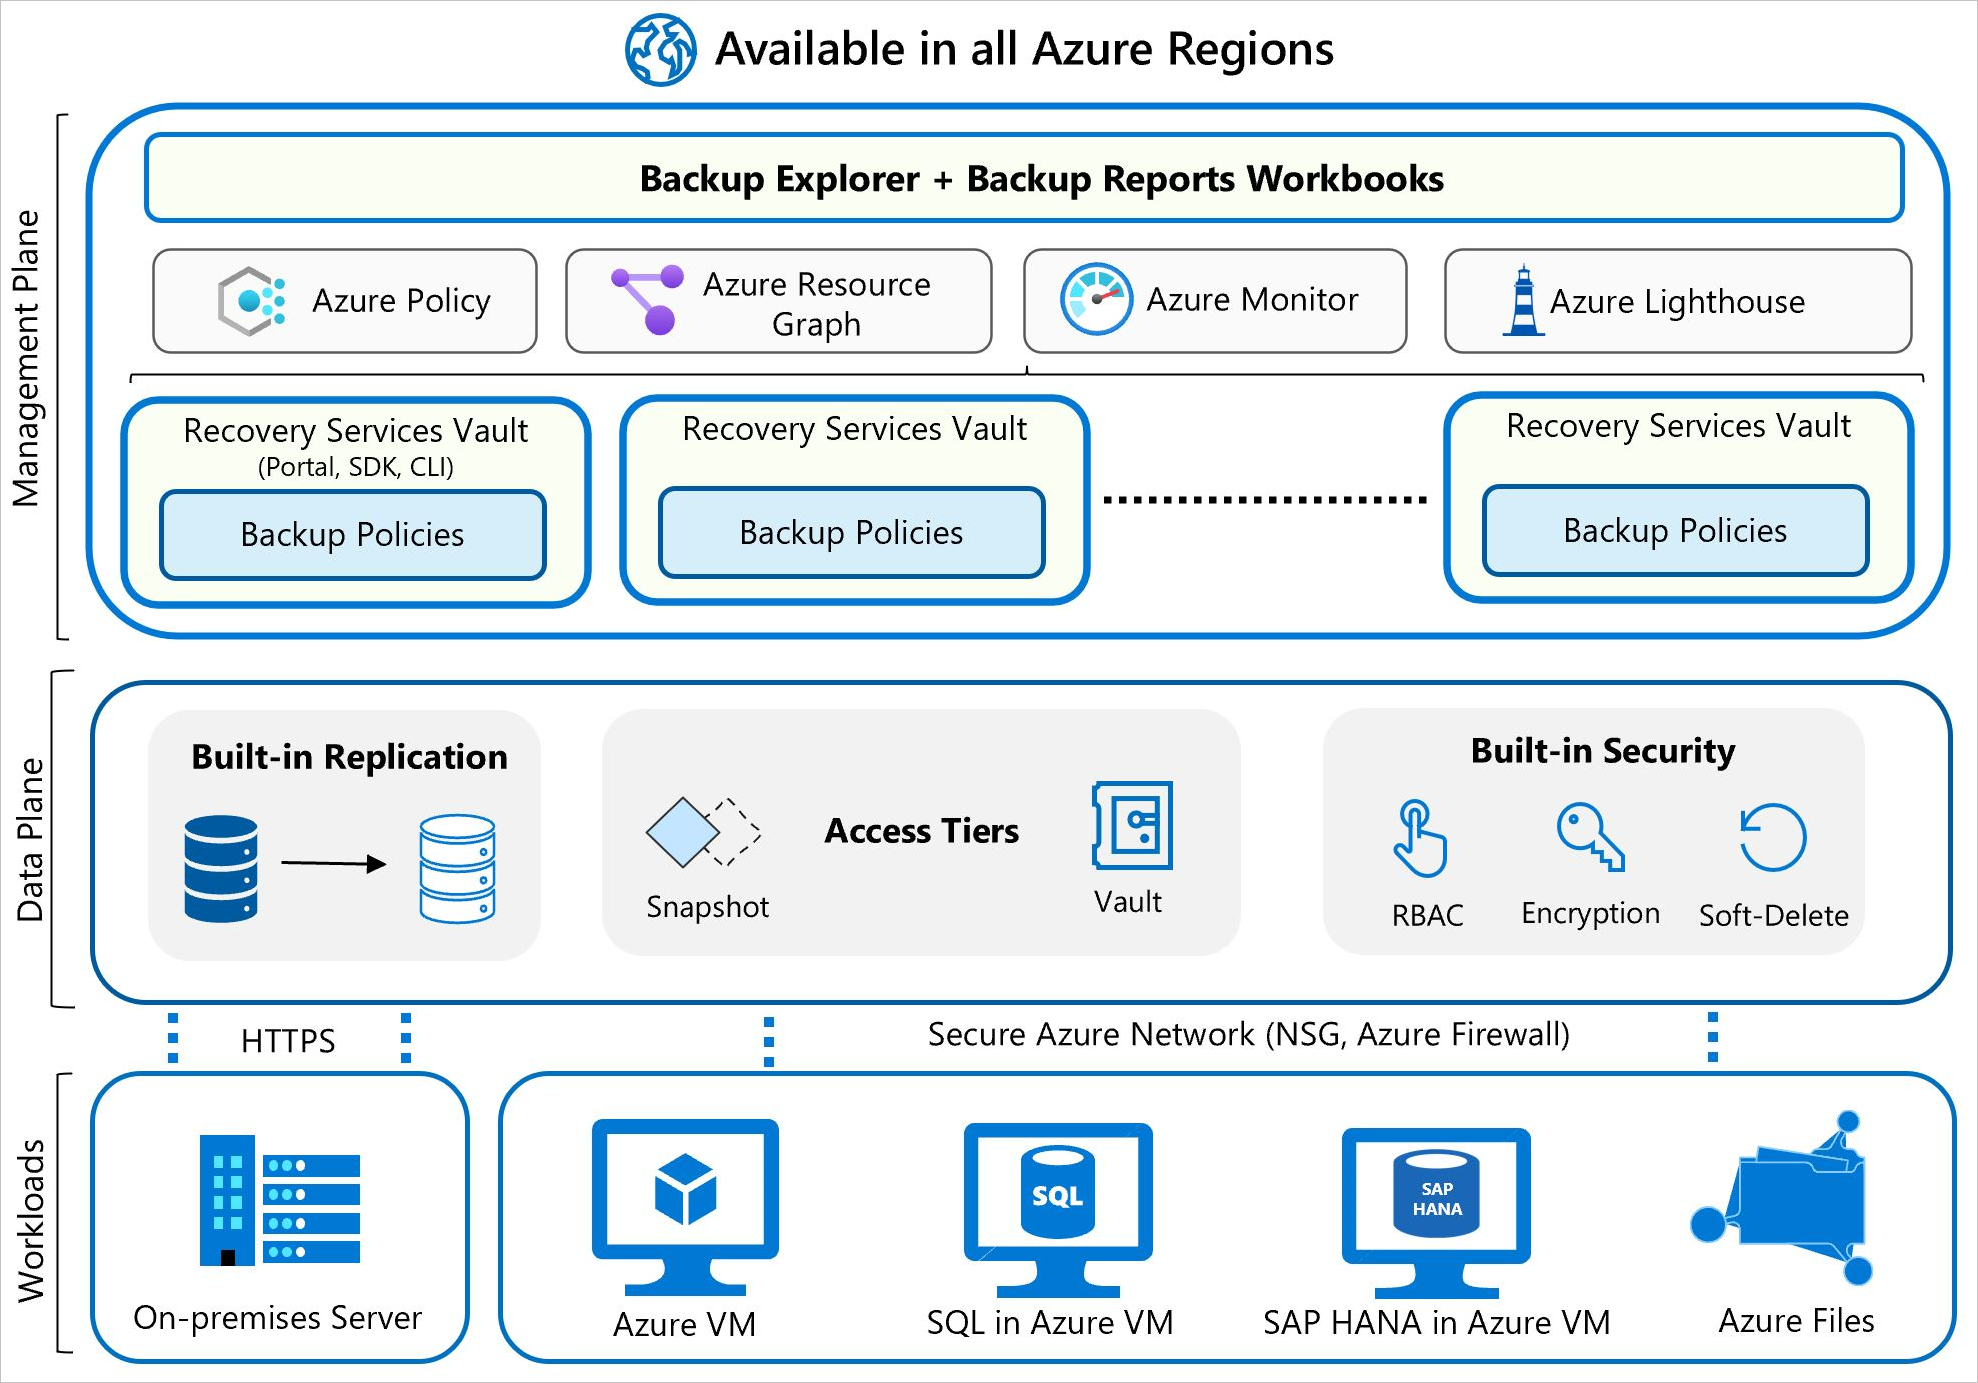 Diagram of Azure Backup architecture displaying workloads at the bottom, feeding into the data plane above that, tying into the management plane with backup policies, Azure policies, Azure Monitor, and Azure Lighthouse services listed for management.